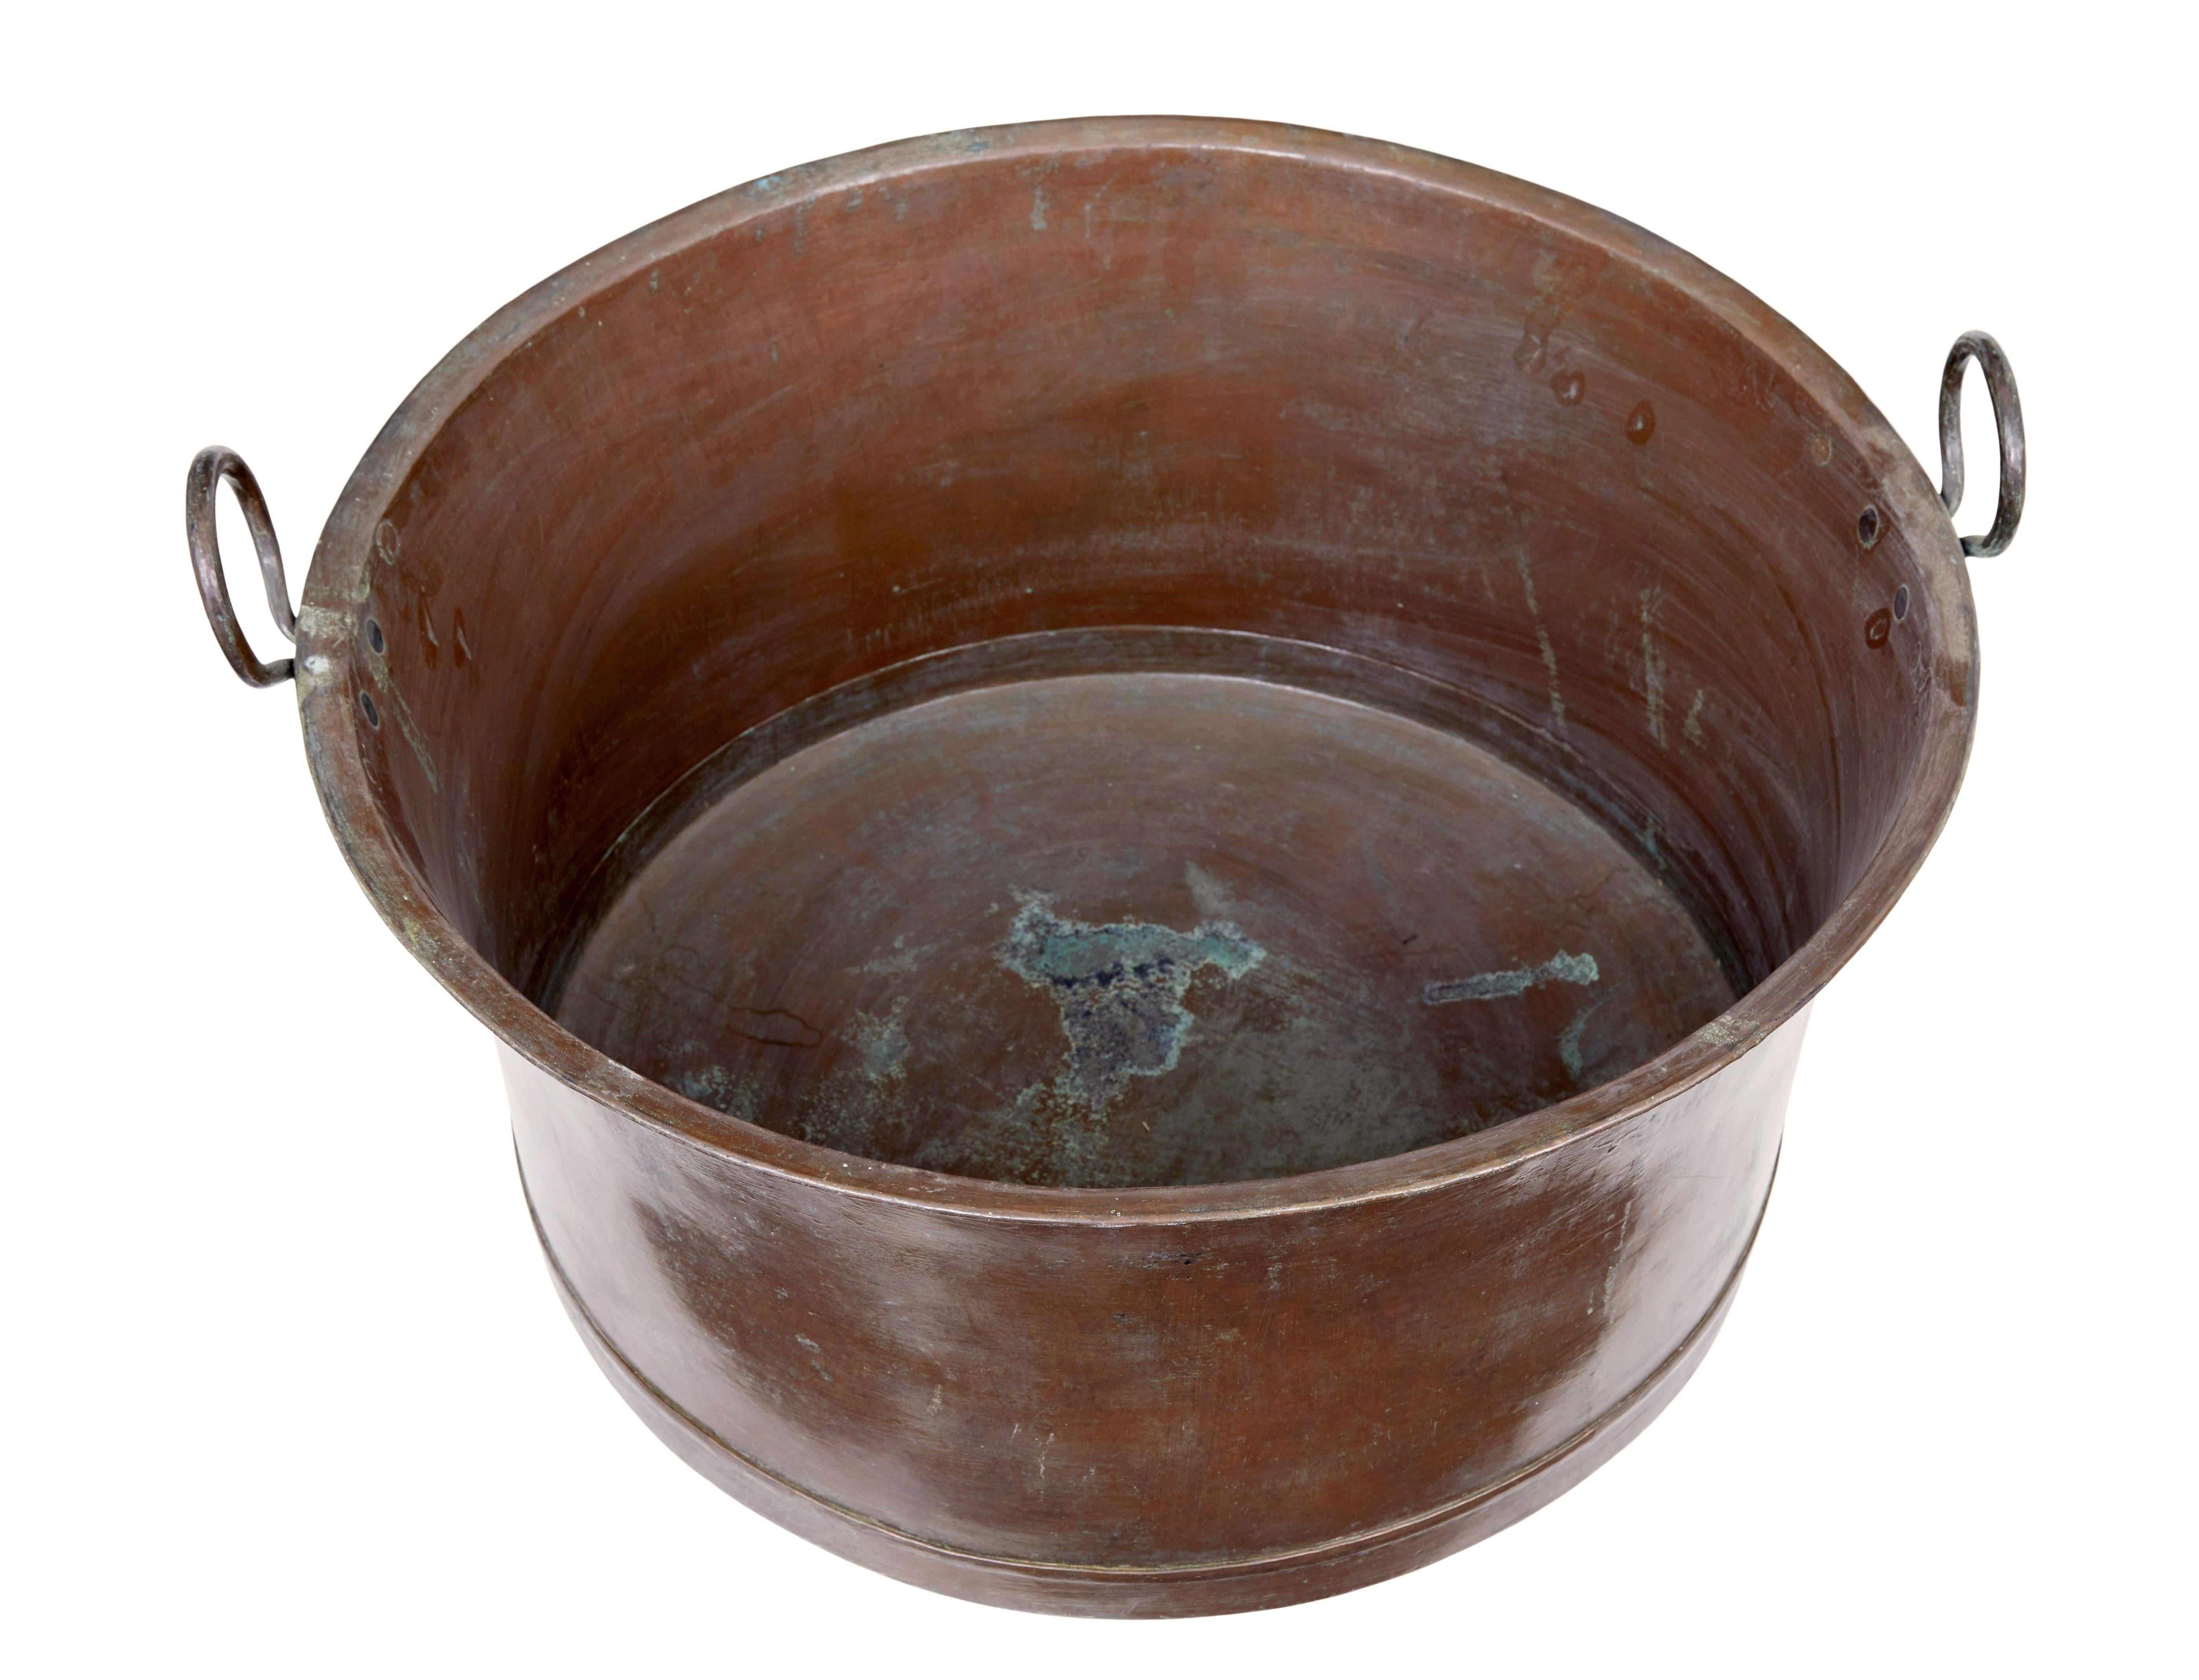 Late 19th century large copper cooking vessel circa 1890.

Large copper cooking pot with rounded bottom and looped handles. Ideal for today as use as a log bin or a cloakroom shoe tidy.

Expected surface marks, presented with it's original